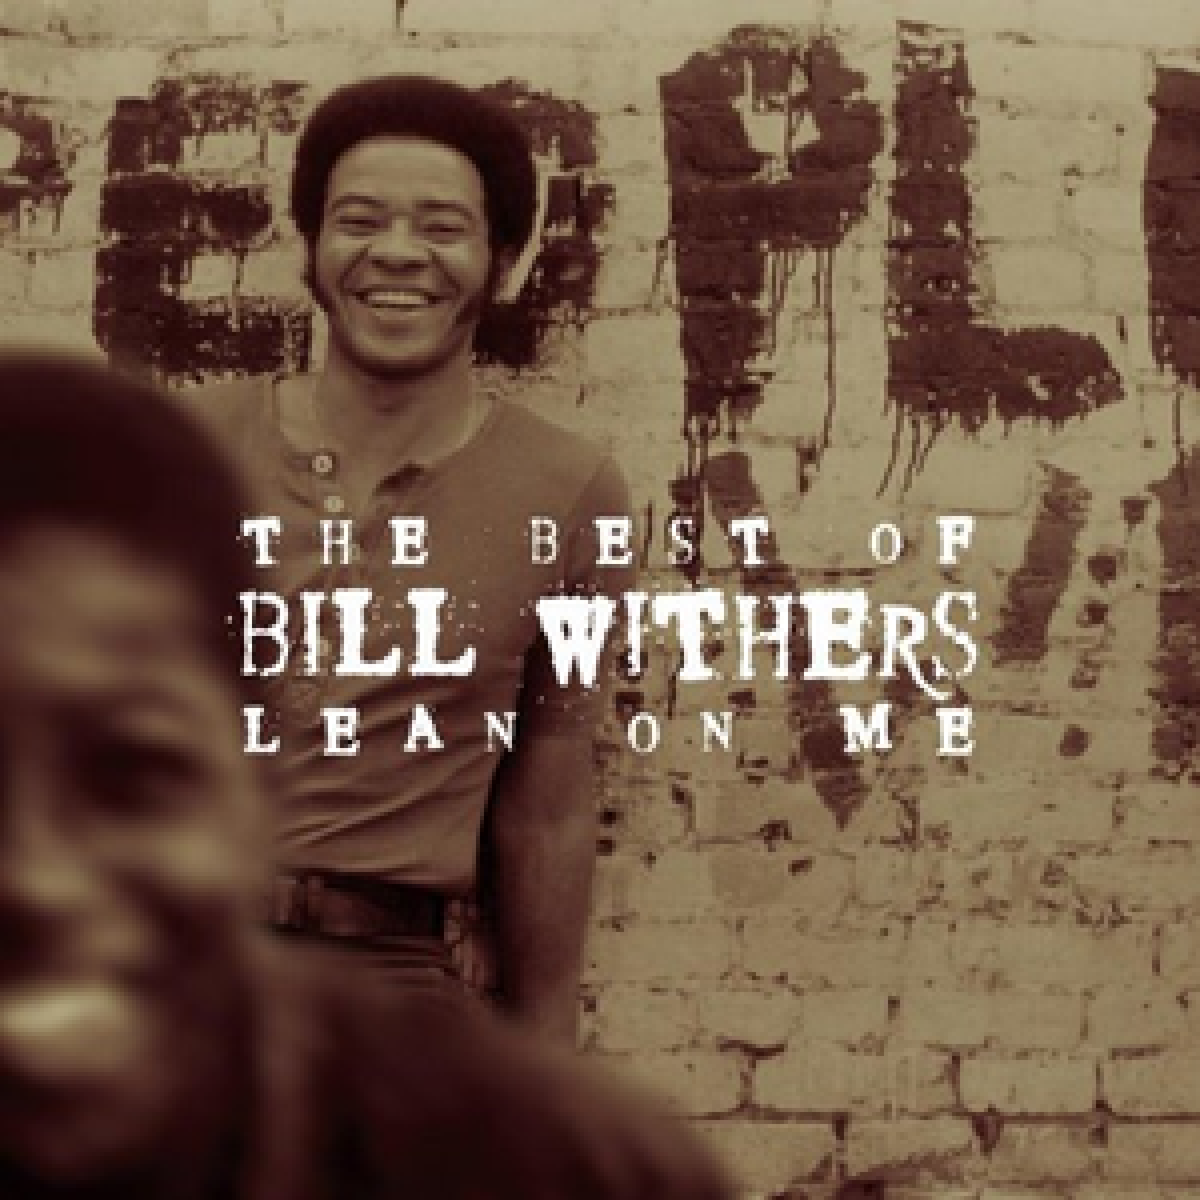 #NowPlaying Bill Withers - Just the two of us https://t.co/4RWFEKbecR